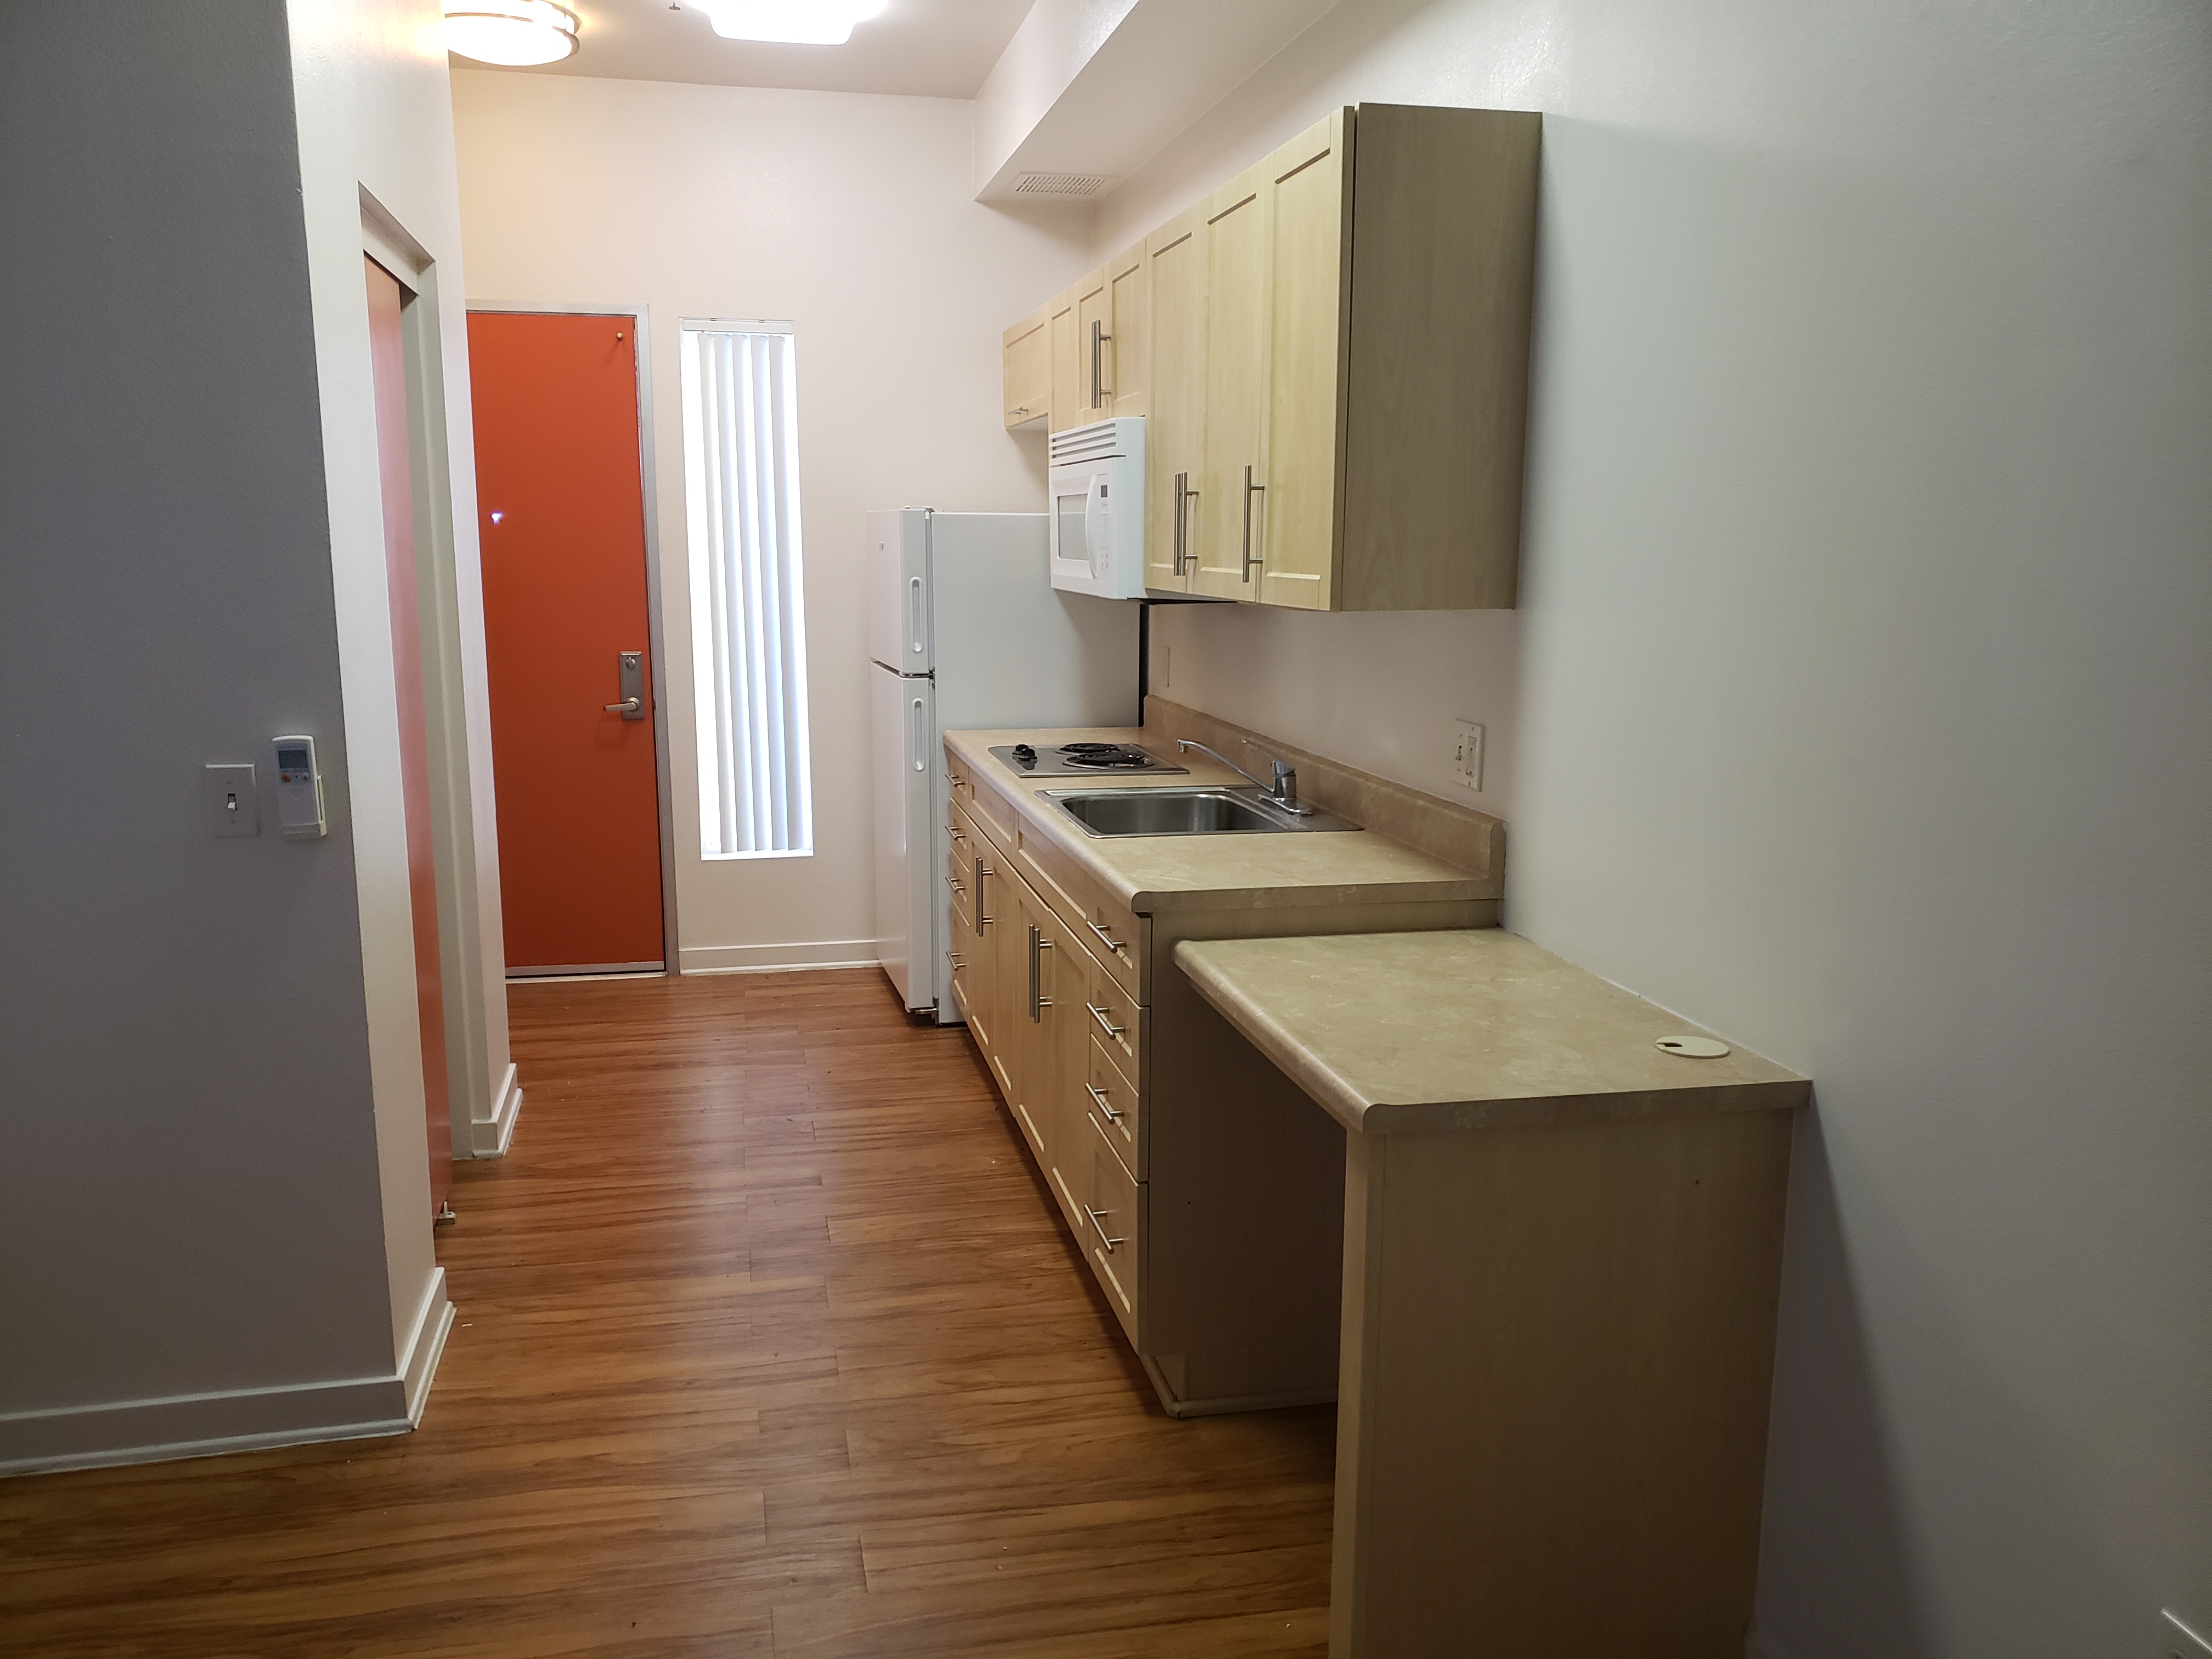 view of walk in kitchen. Upper and lower cabinets, fridge, two burner electric stove, large sink, and microwave attached to bottom of upper cabinets. At the end of the cabinets there is an attached wheelchair accessible table